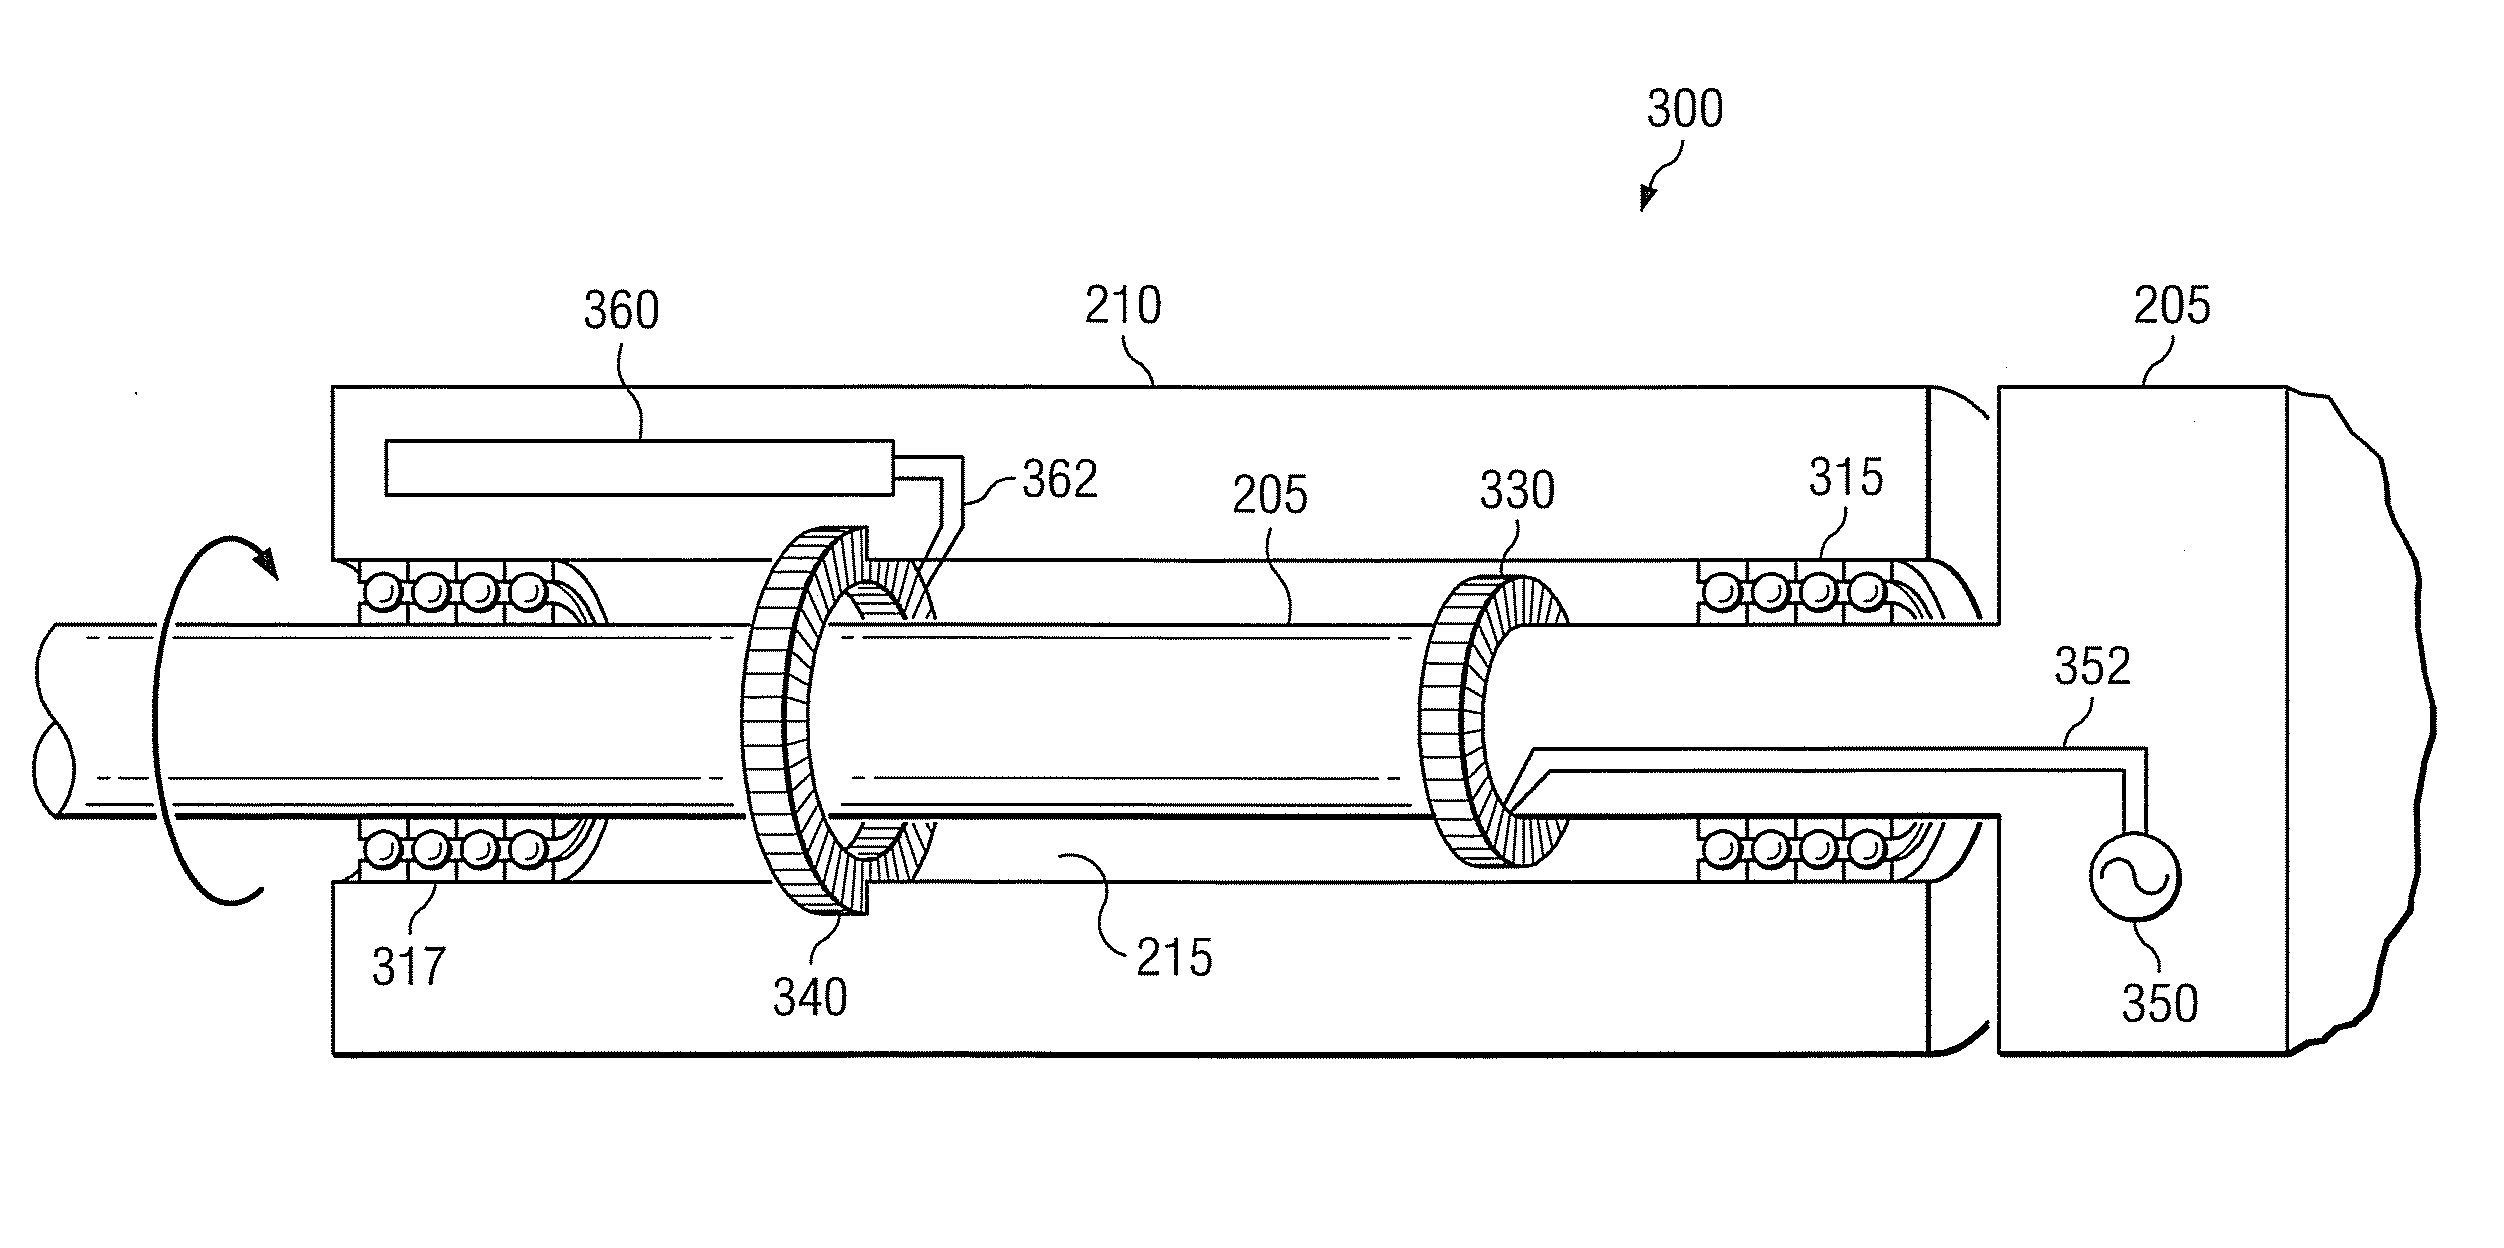 Apparatus for electrical power and/or data transfer between rotating components in a drill string